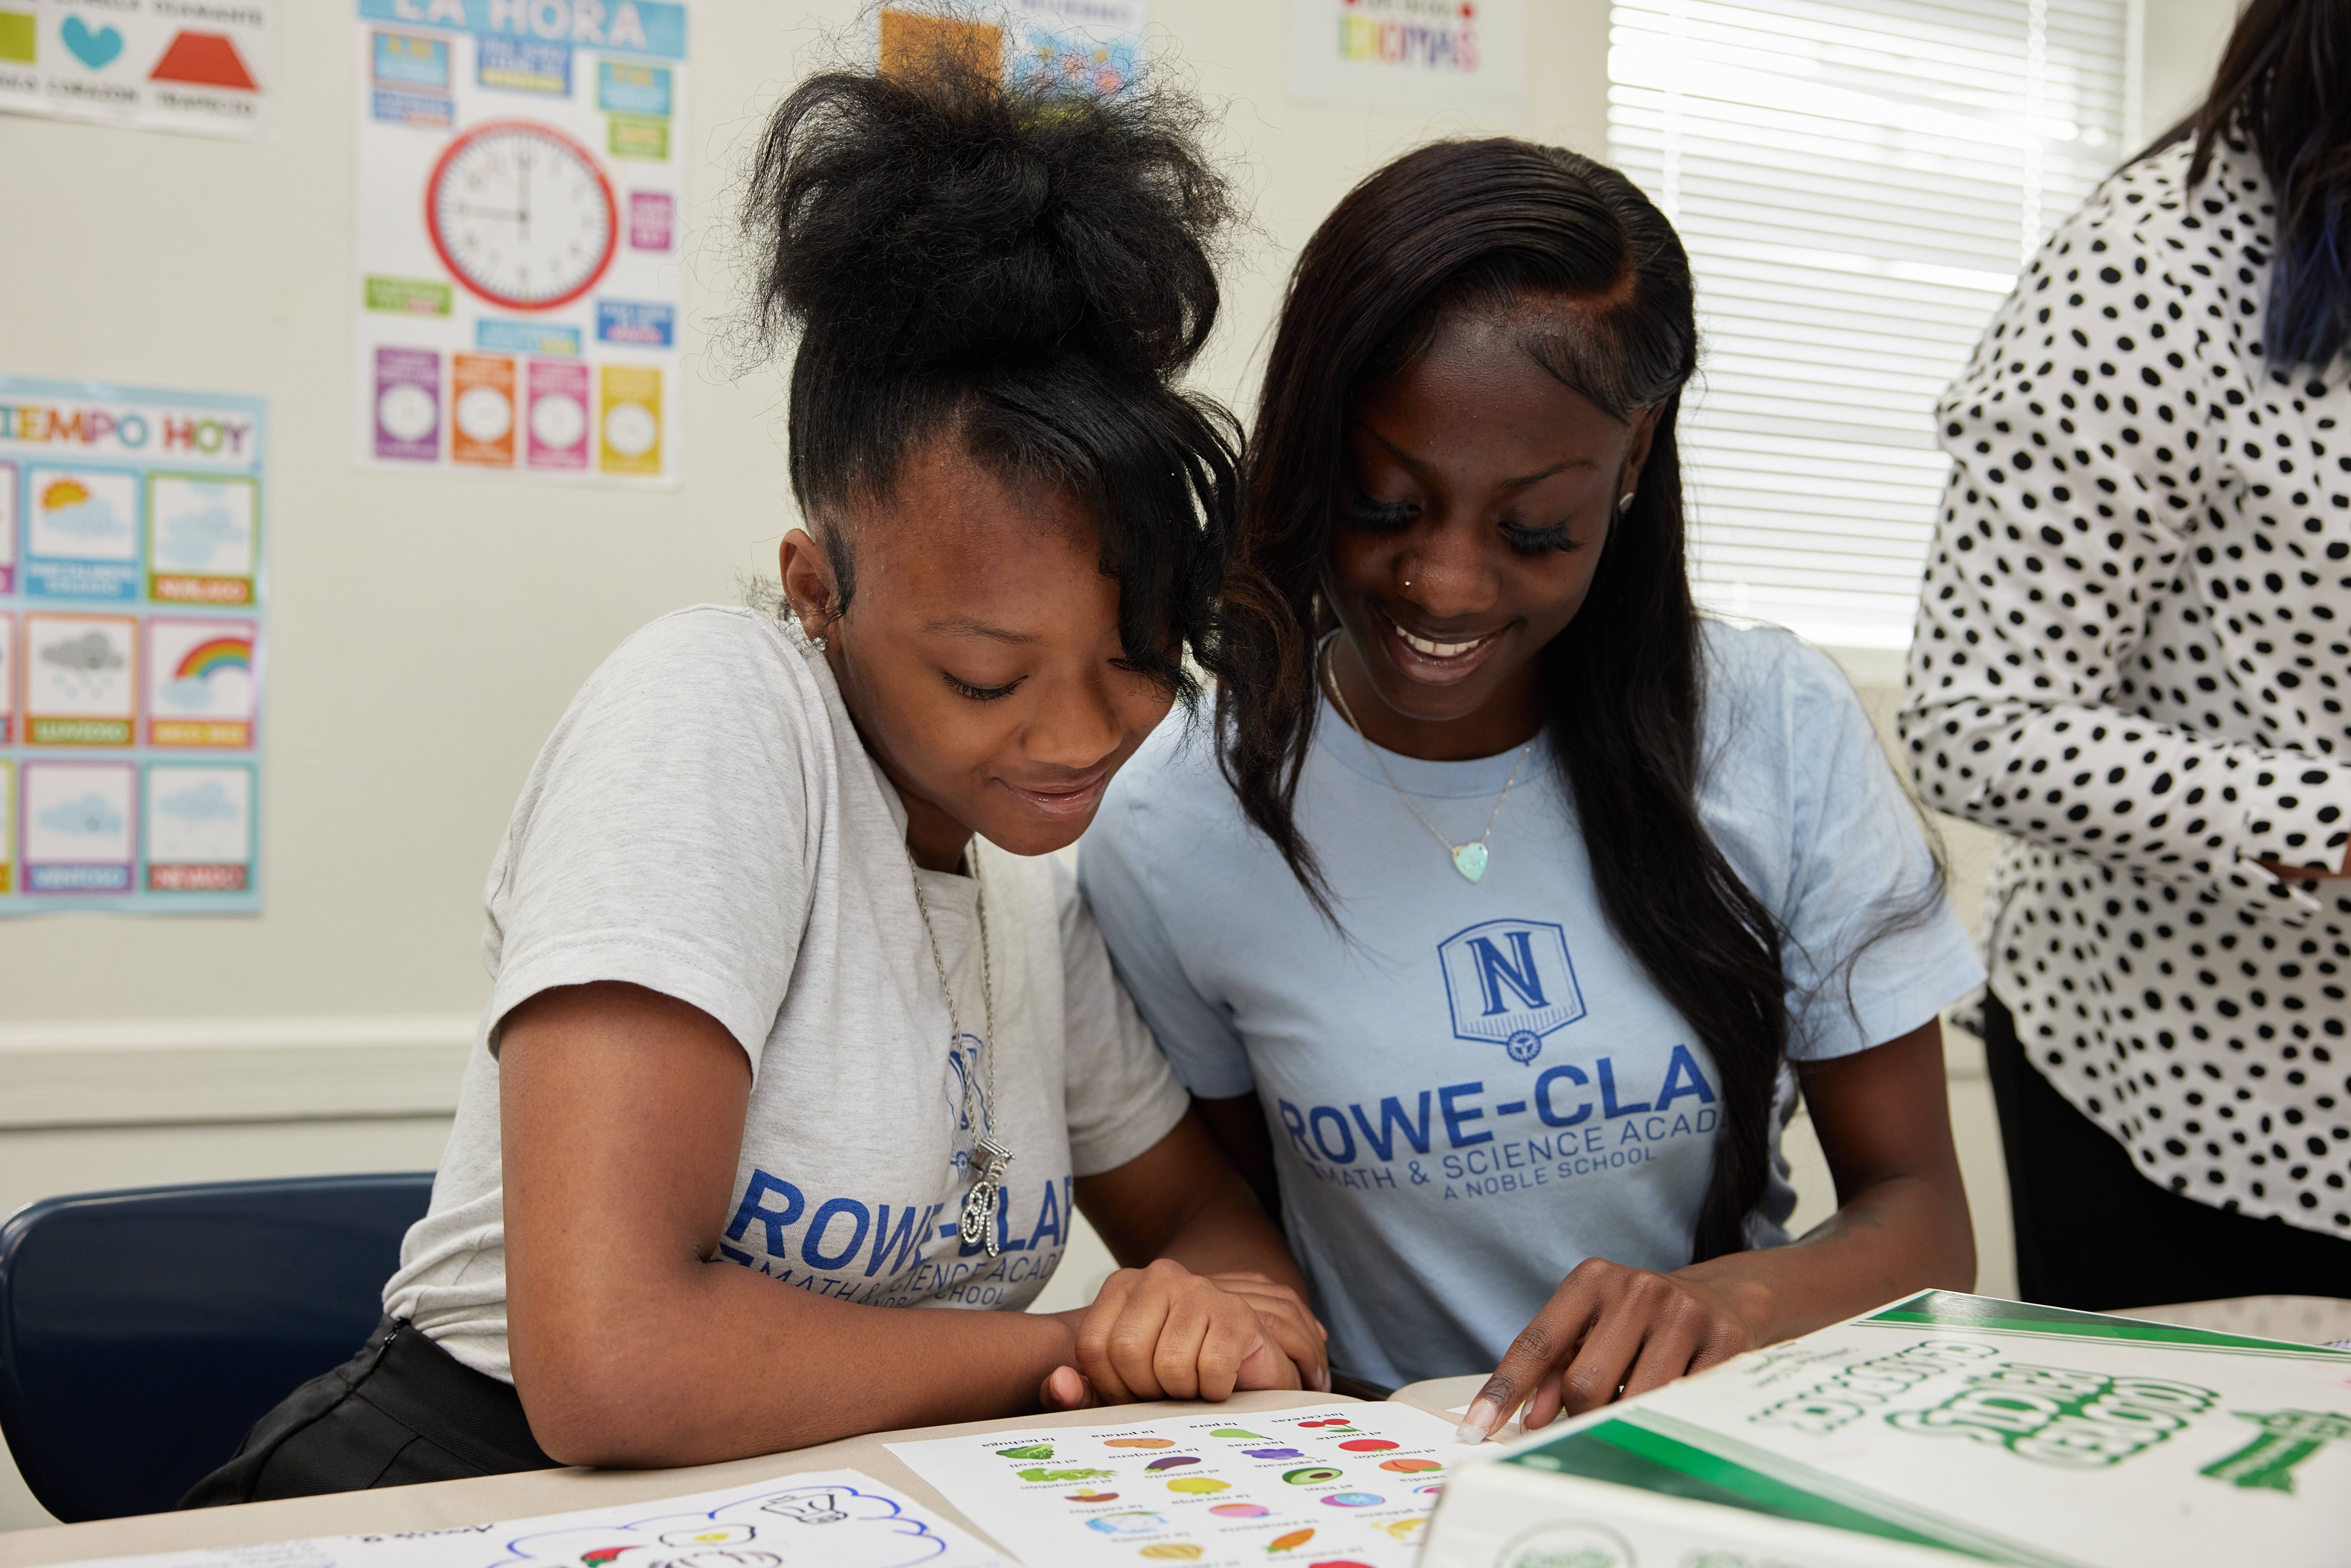 Image shows two students at Rowe-Clark Math & Science Academy working on an exercise in Spanish class.